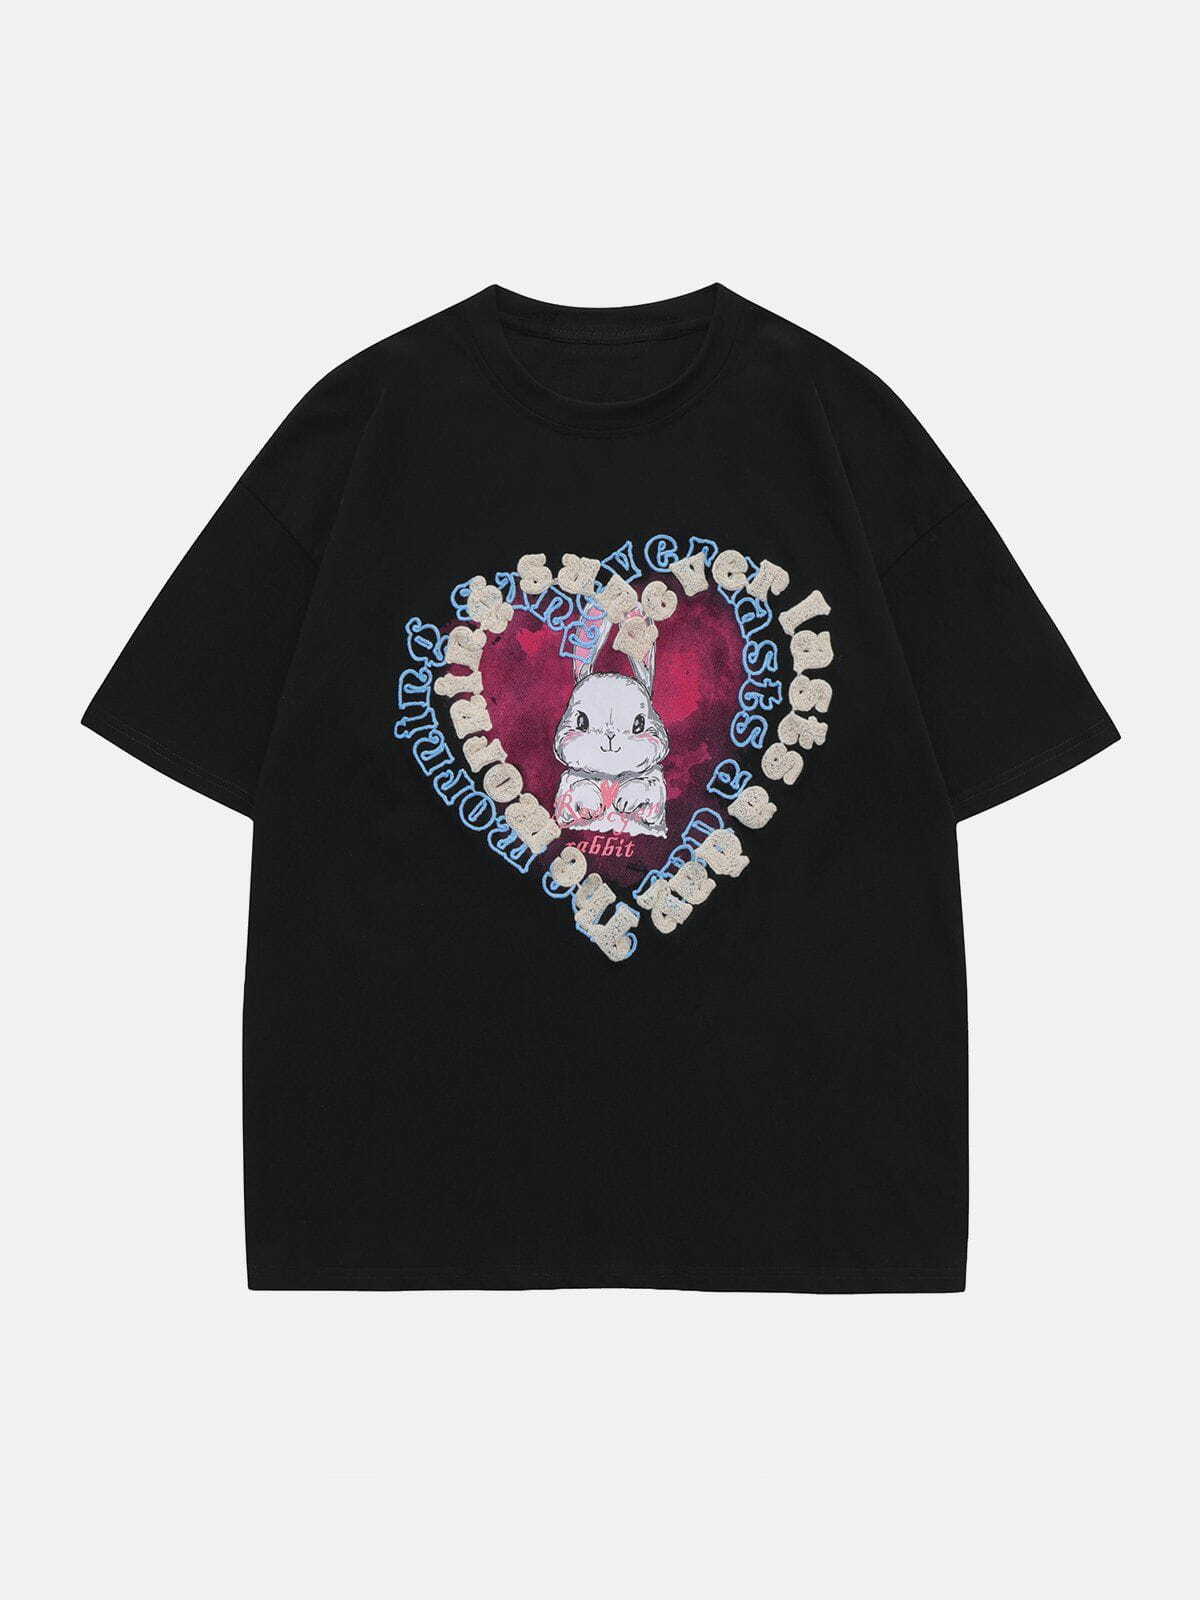 embroidered rabbit heart tee quirky & retro streetwear 5558